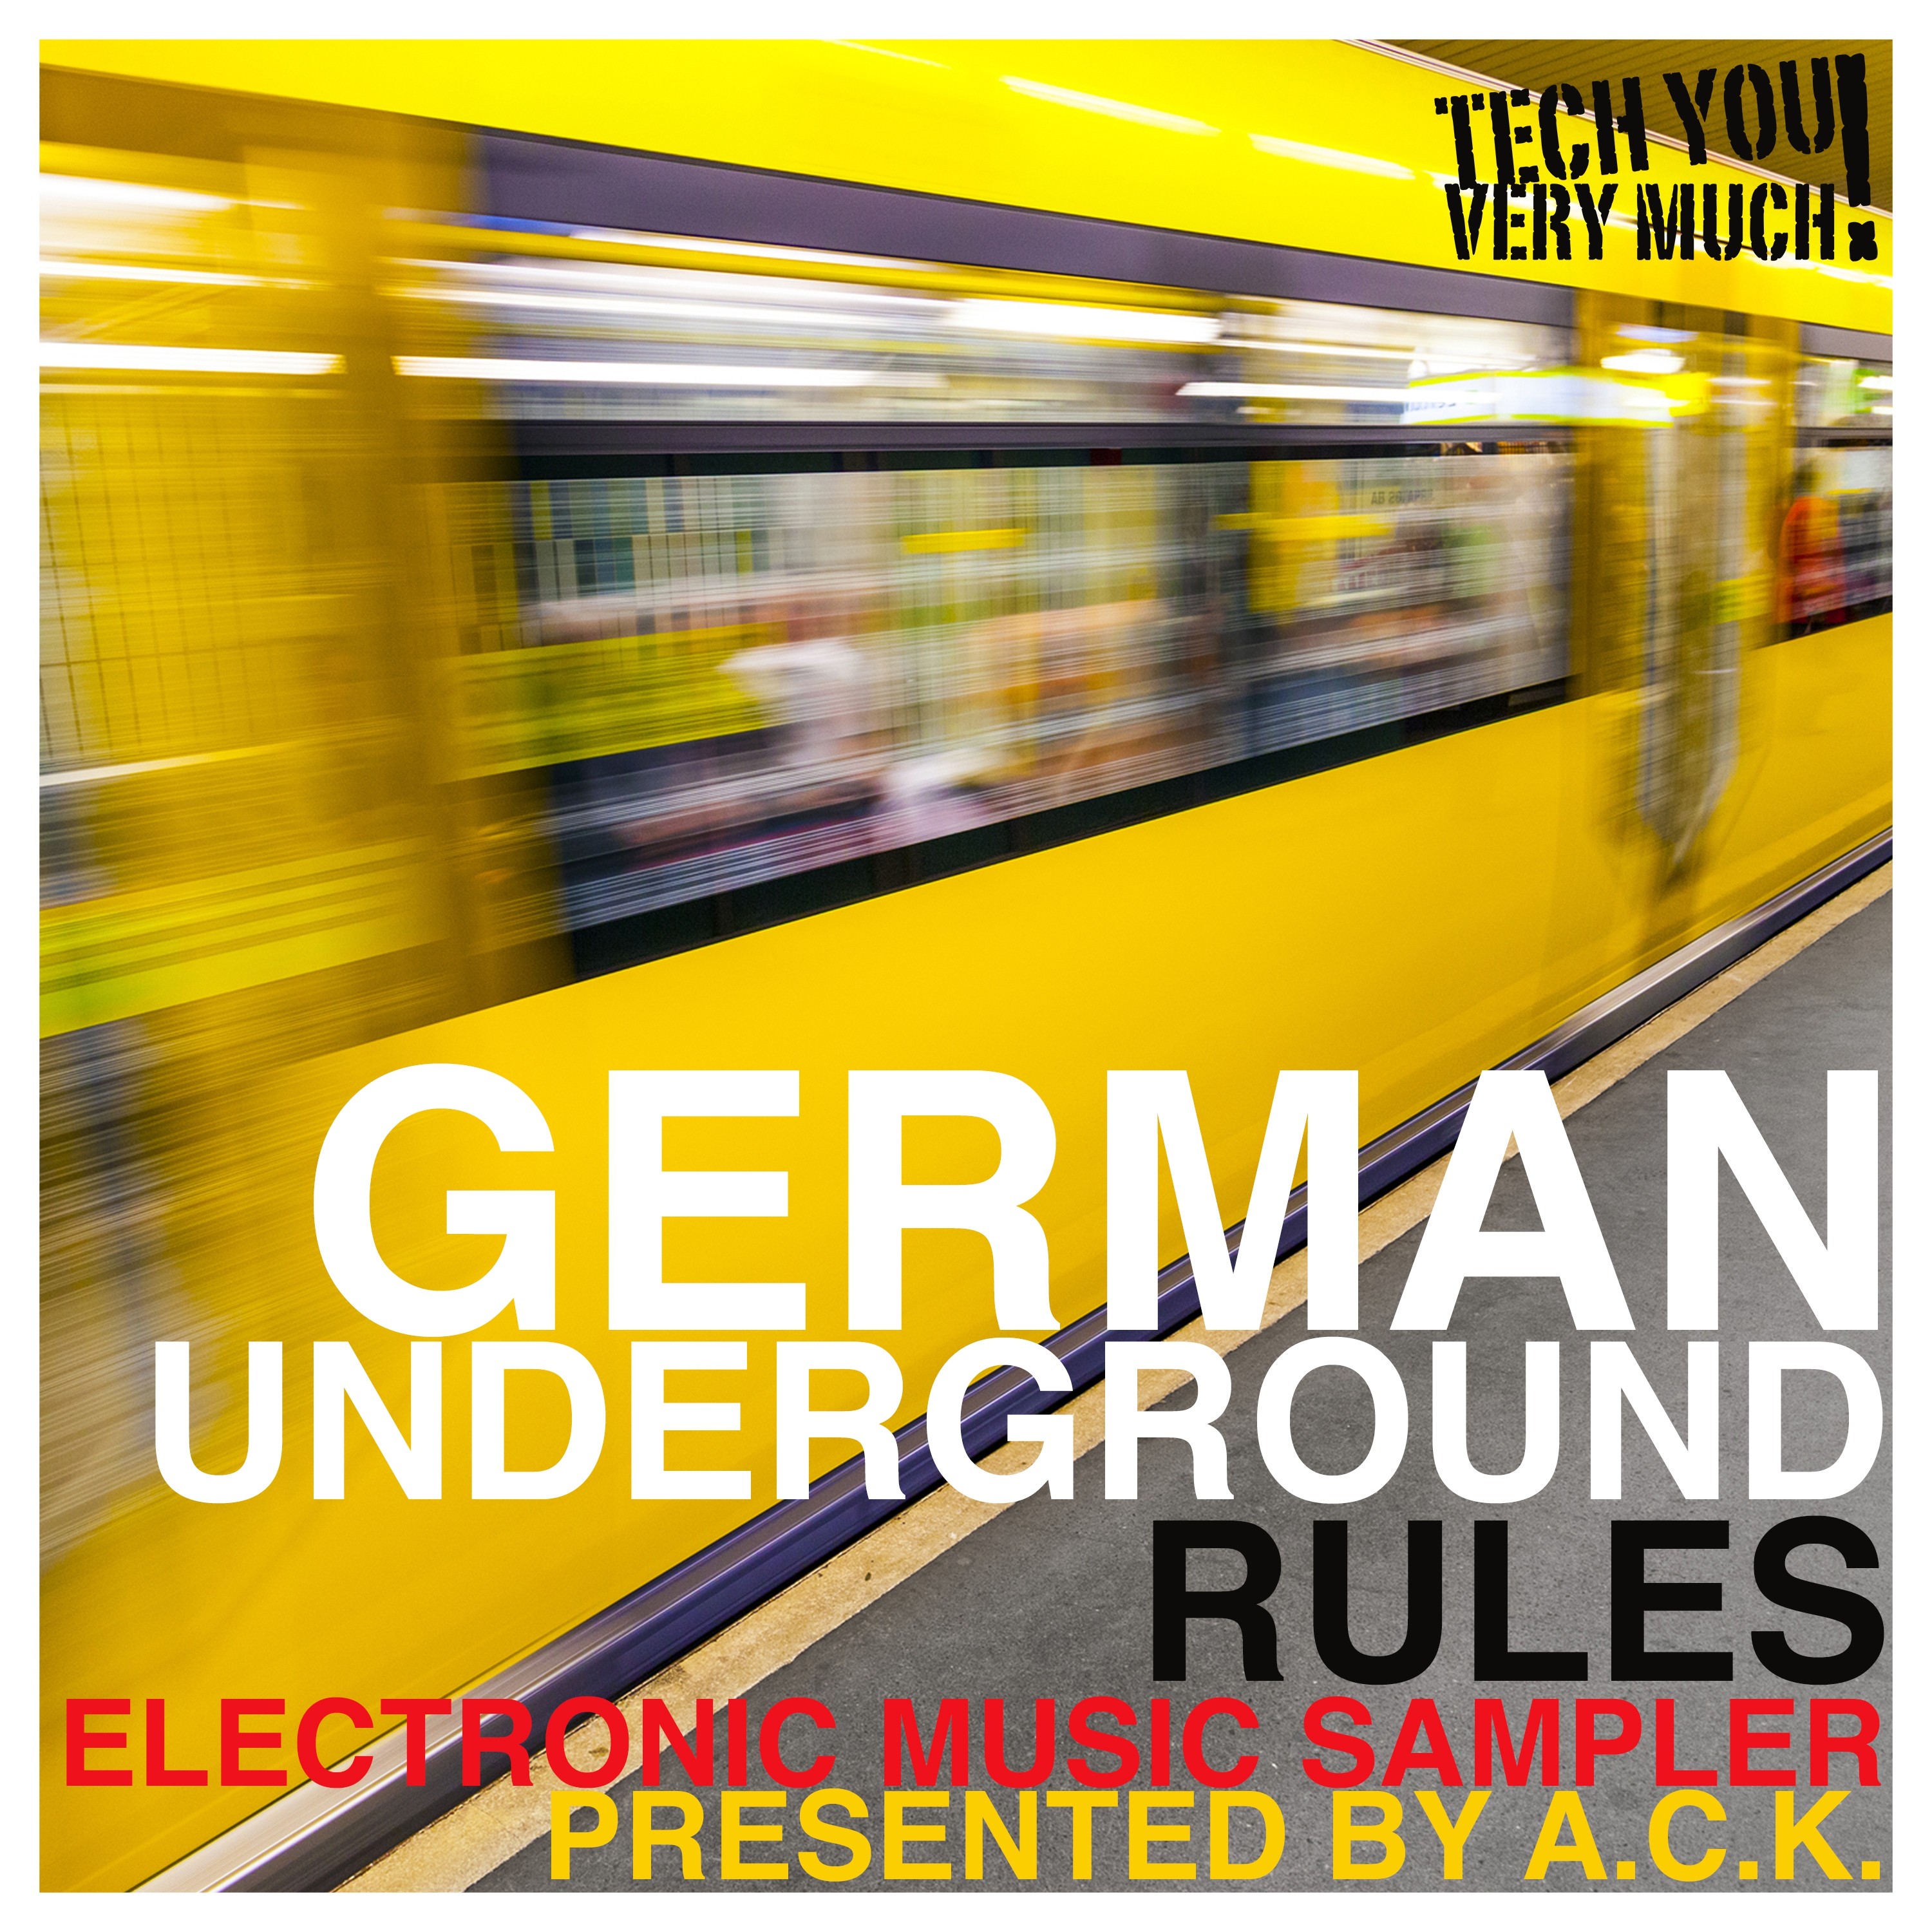 German Underground Rules (Presented By A.C.K.) (Electronic Music Sampler)